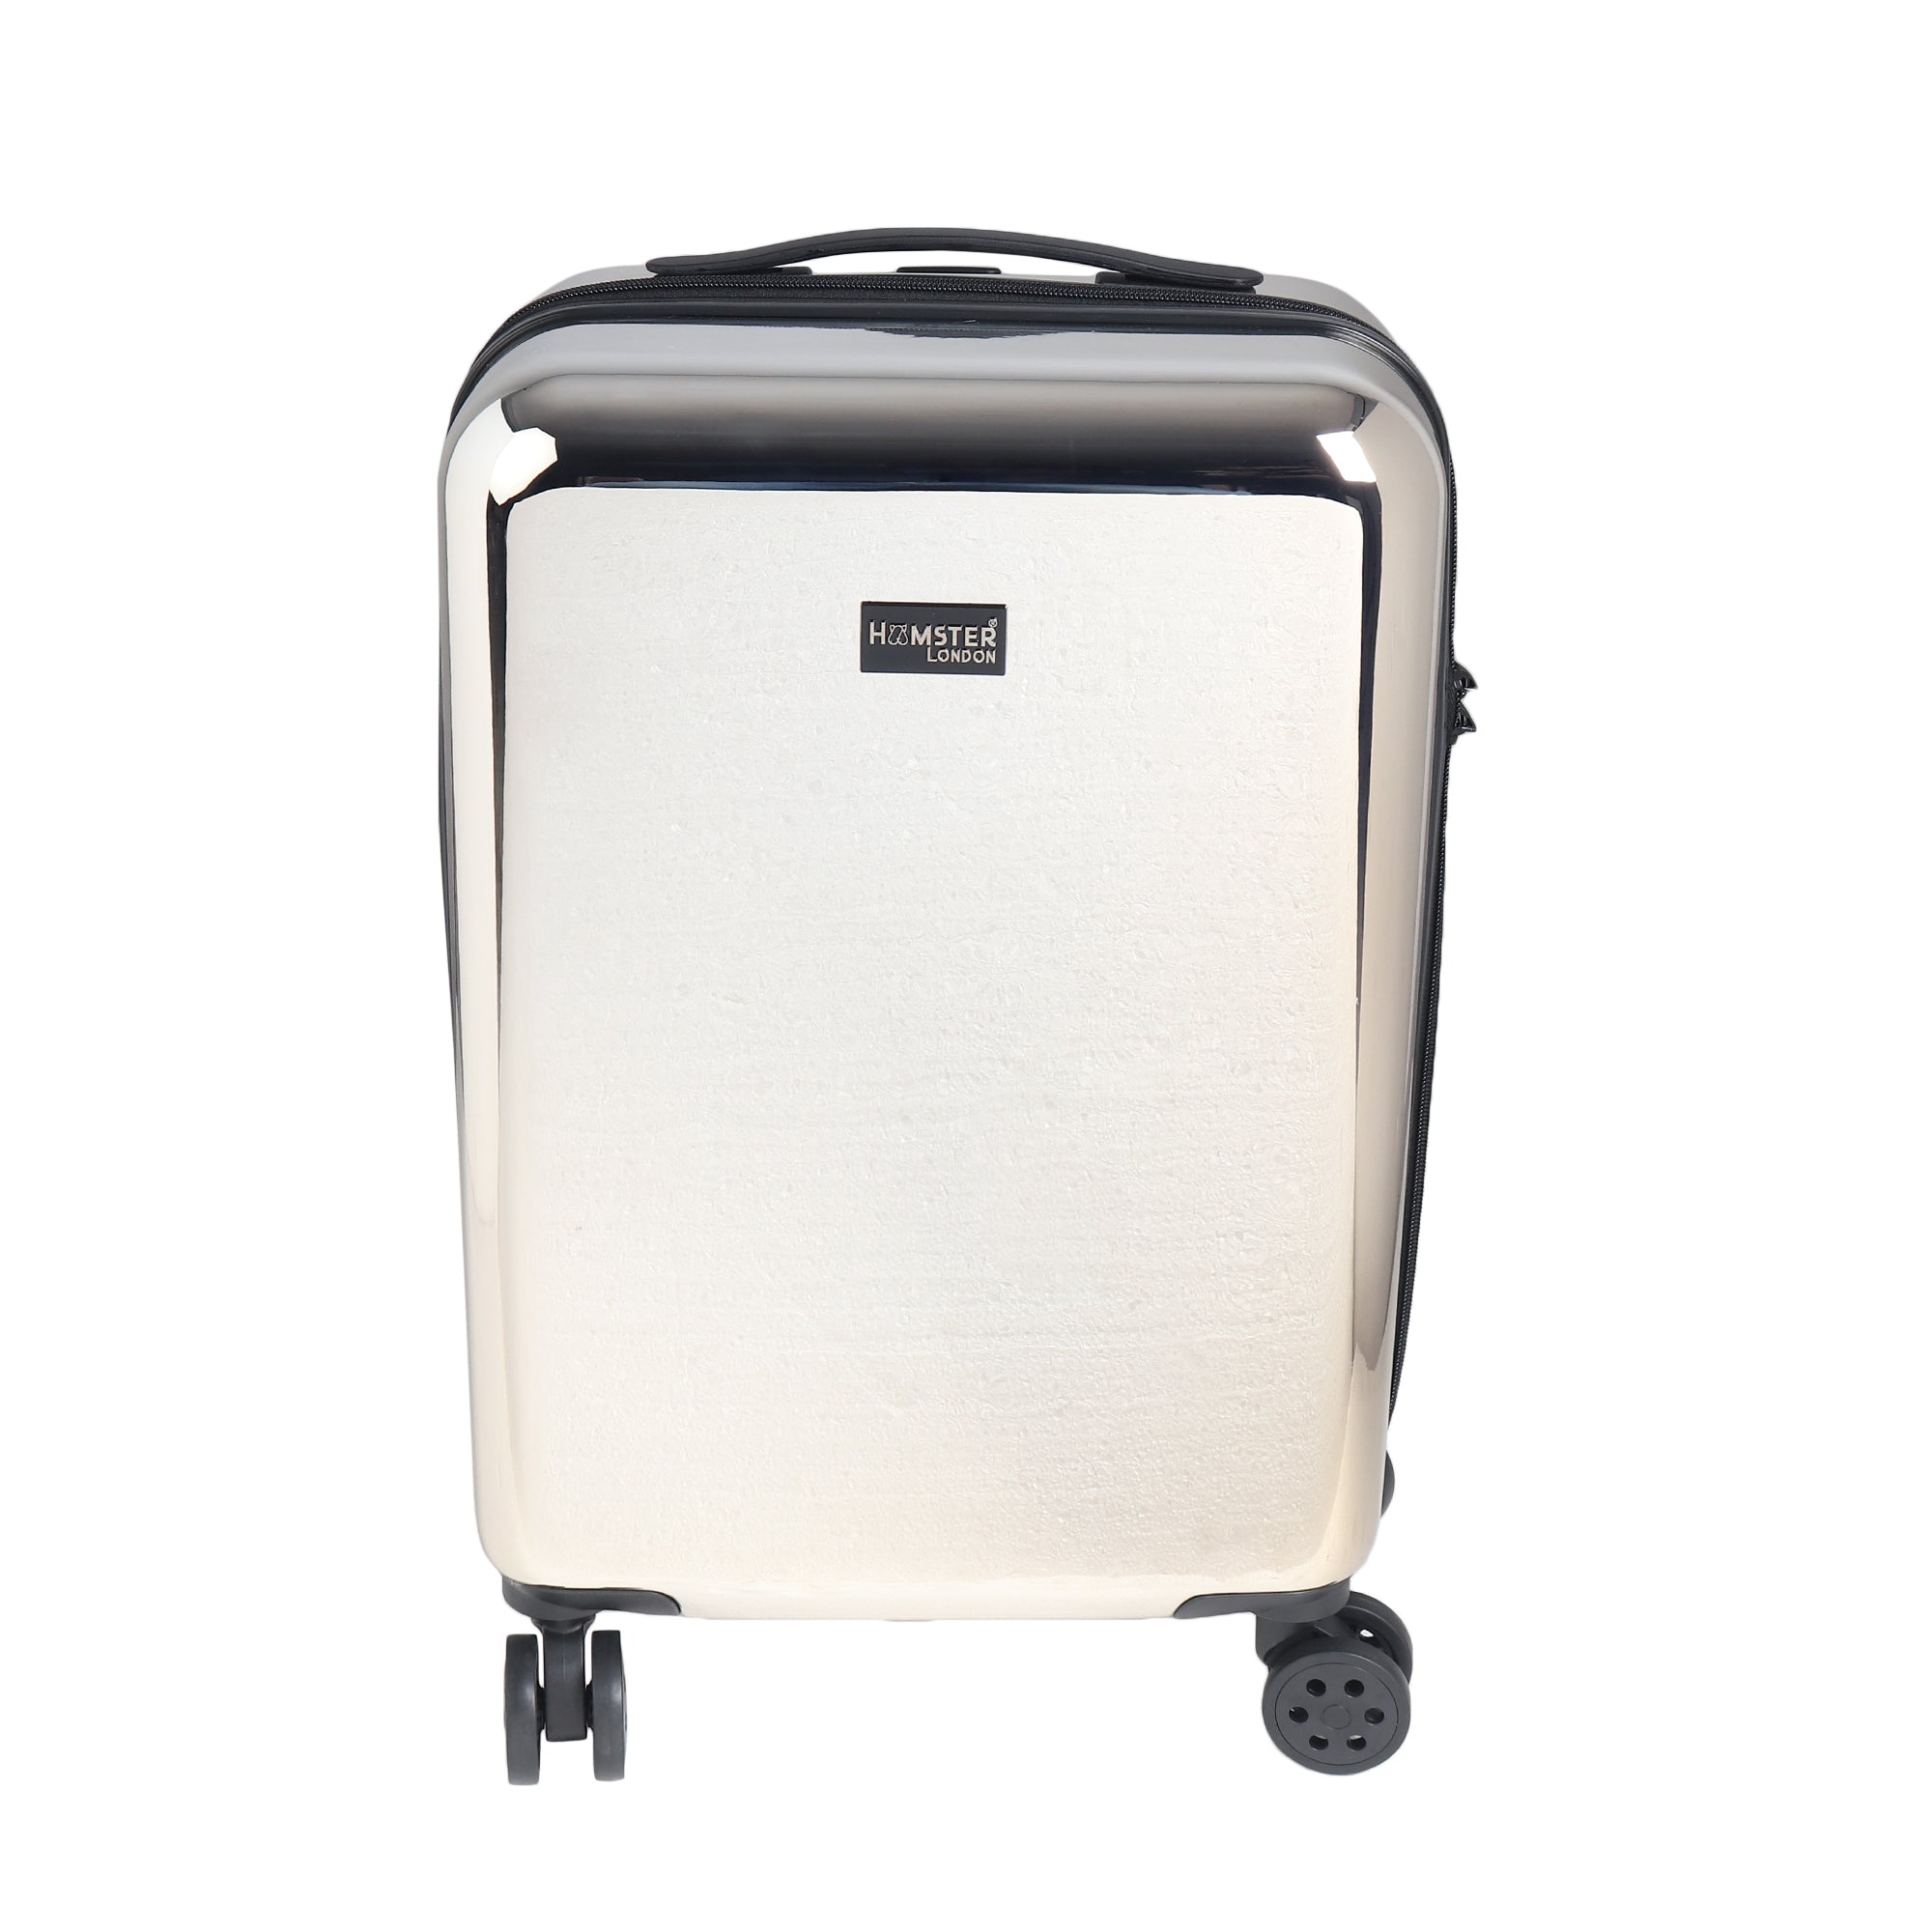 HL Vintage Suitcase/ 55 Cms ABS+ Polycarbonate Mirror Finish Hardsided Cabin Luggage ( Silver) With Personalization